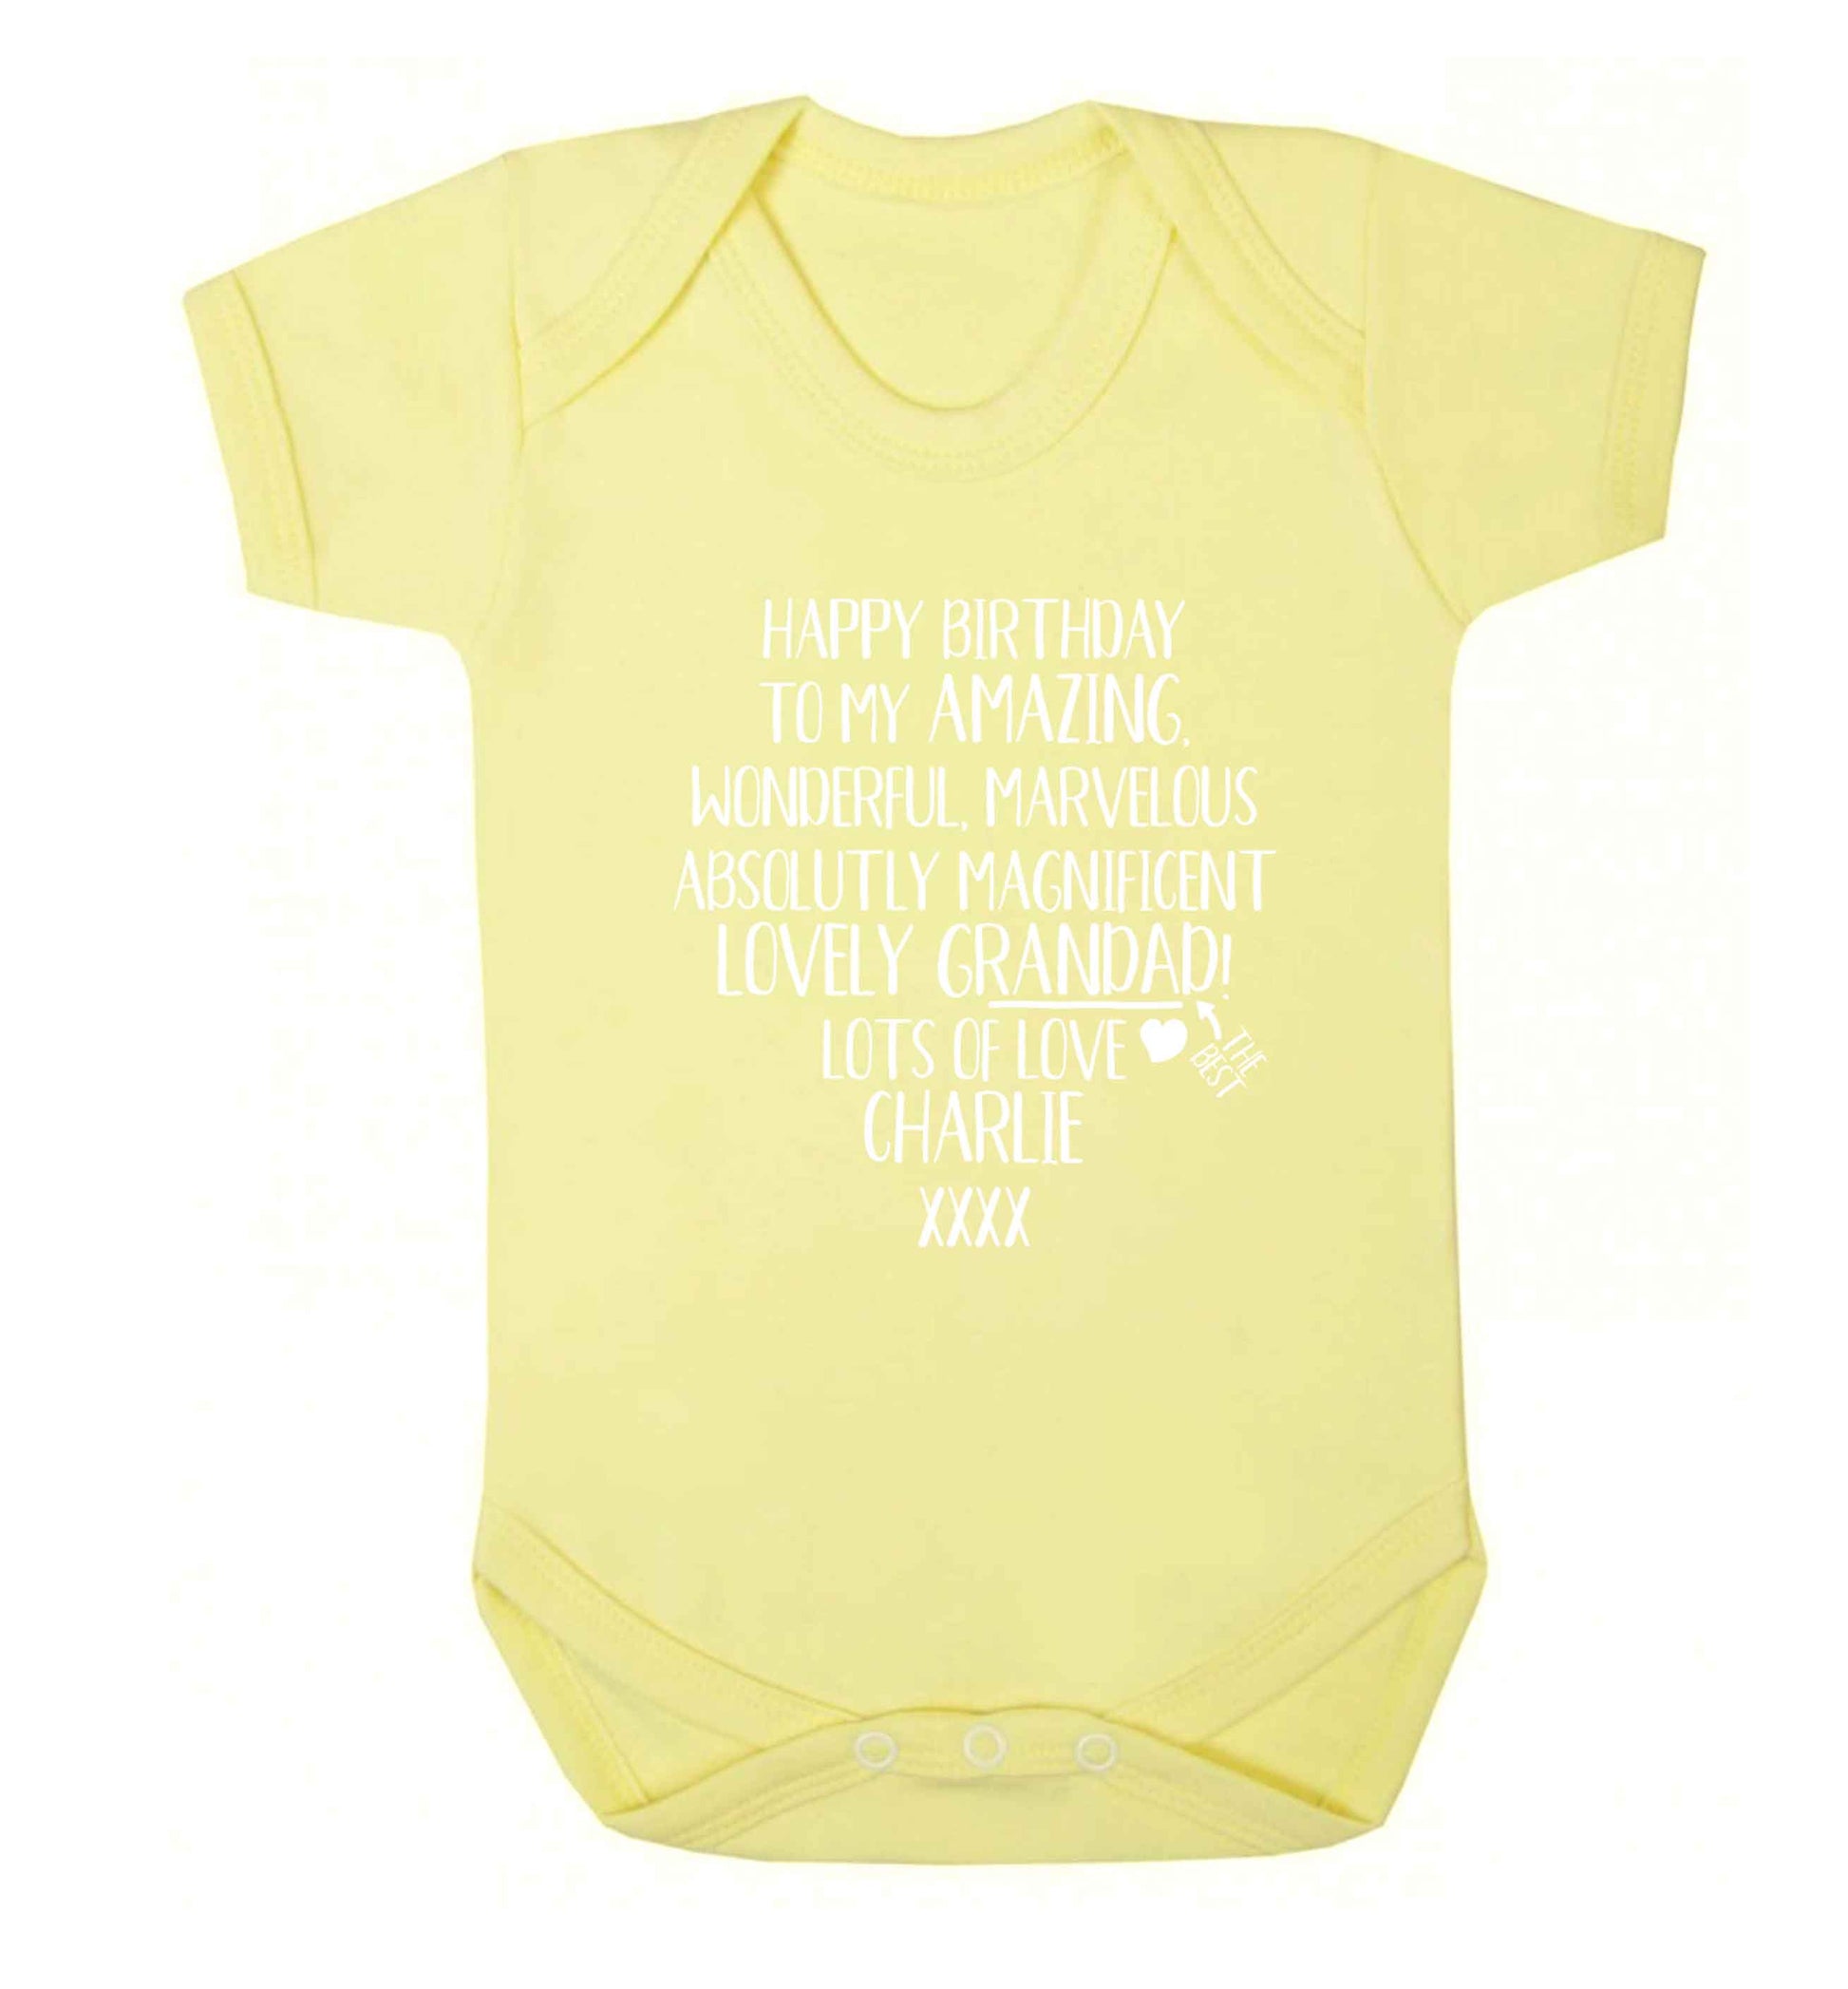 Personalised happy birthday to my amazing, wonderful, lovely grandad Baby Vest pale yellow 18-24 months